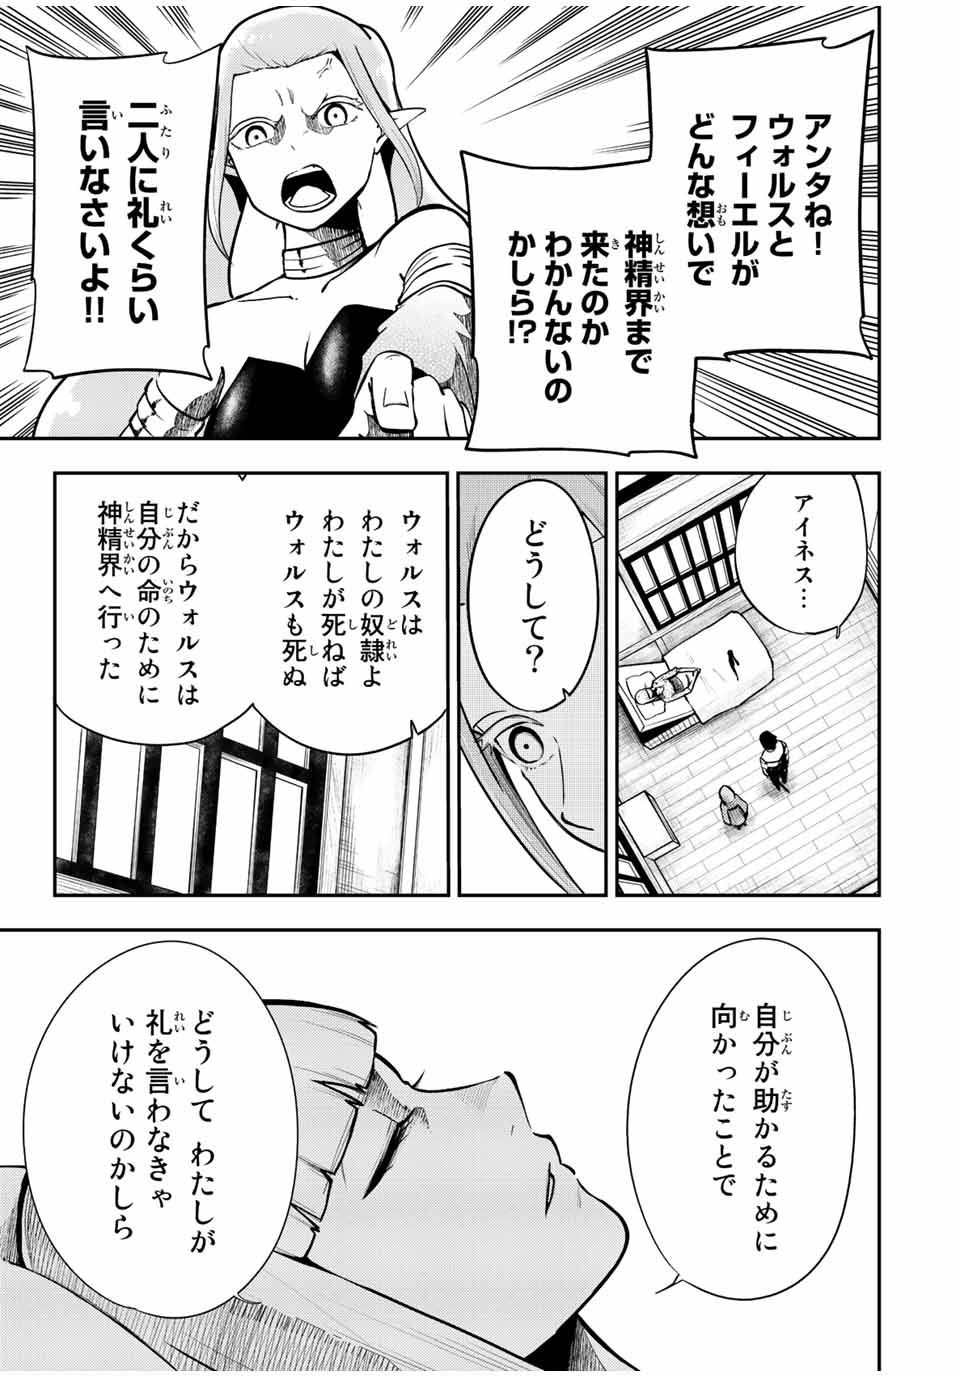 the strongest former prince-; 奴隷転生 ～その奴隷、最強の元王子につき～ 第78話 - Page 11